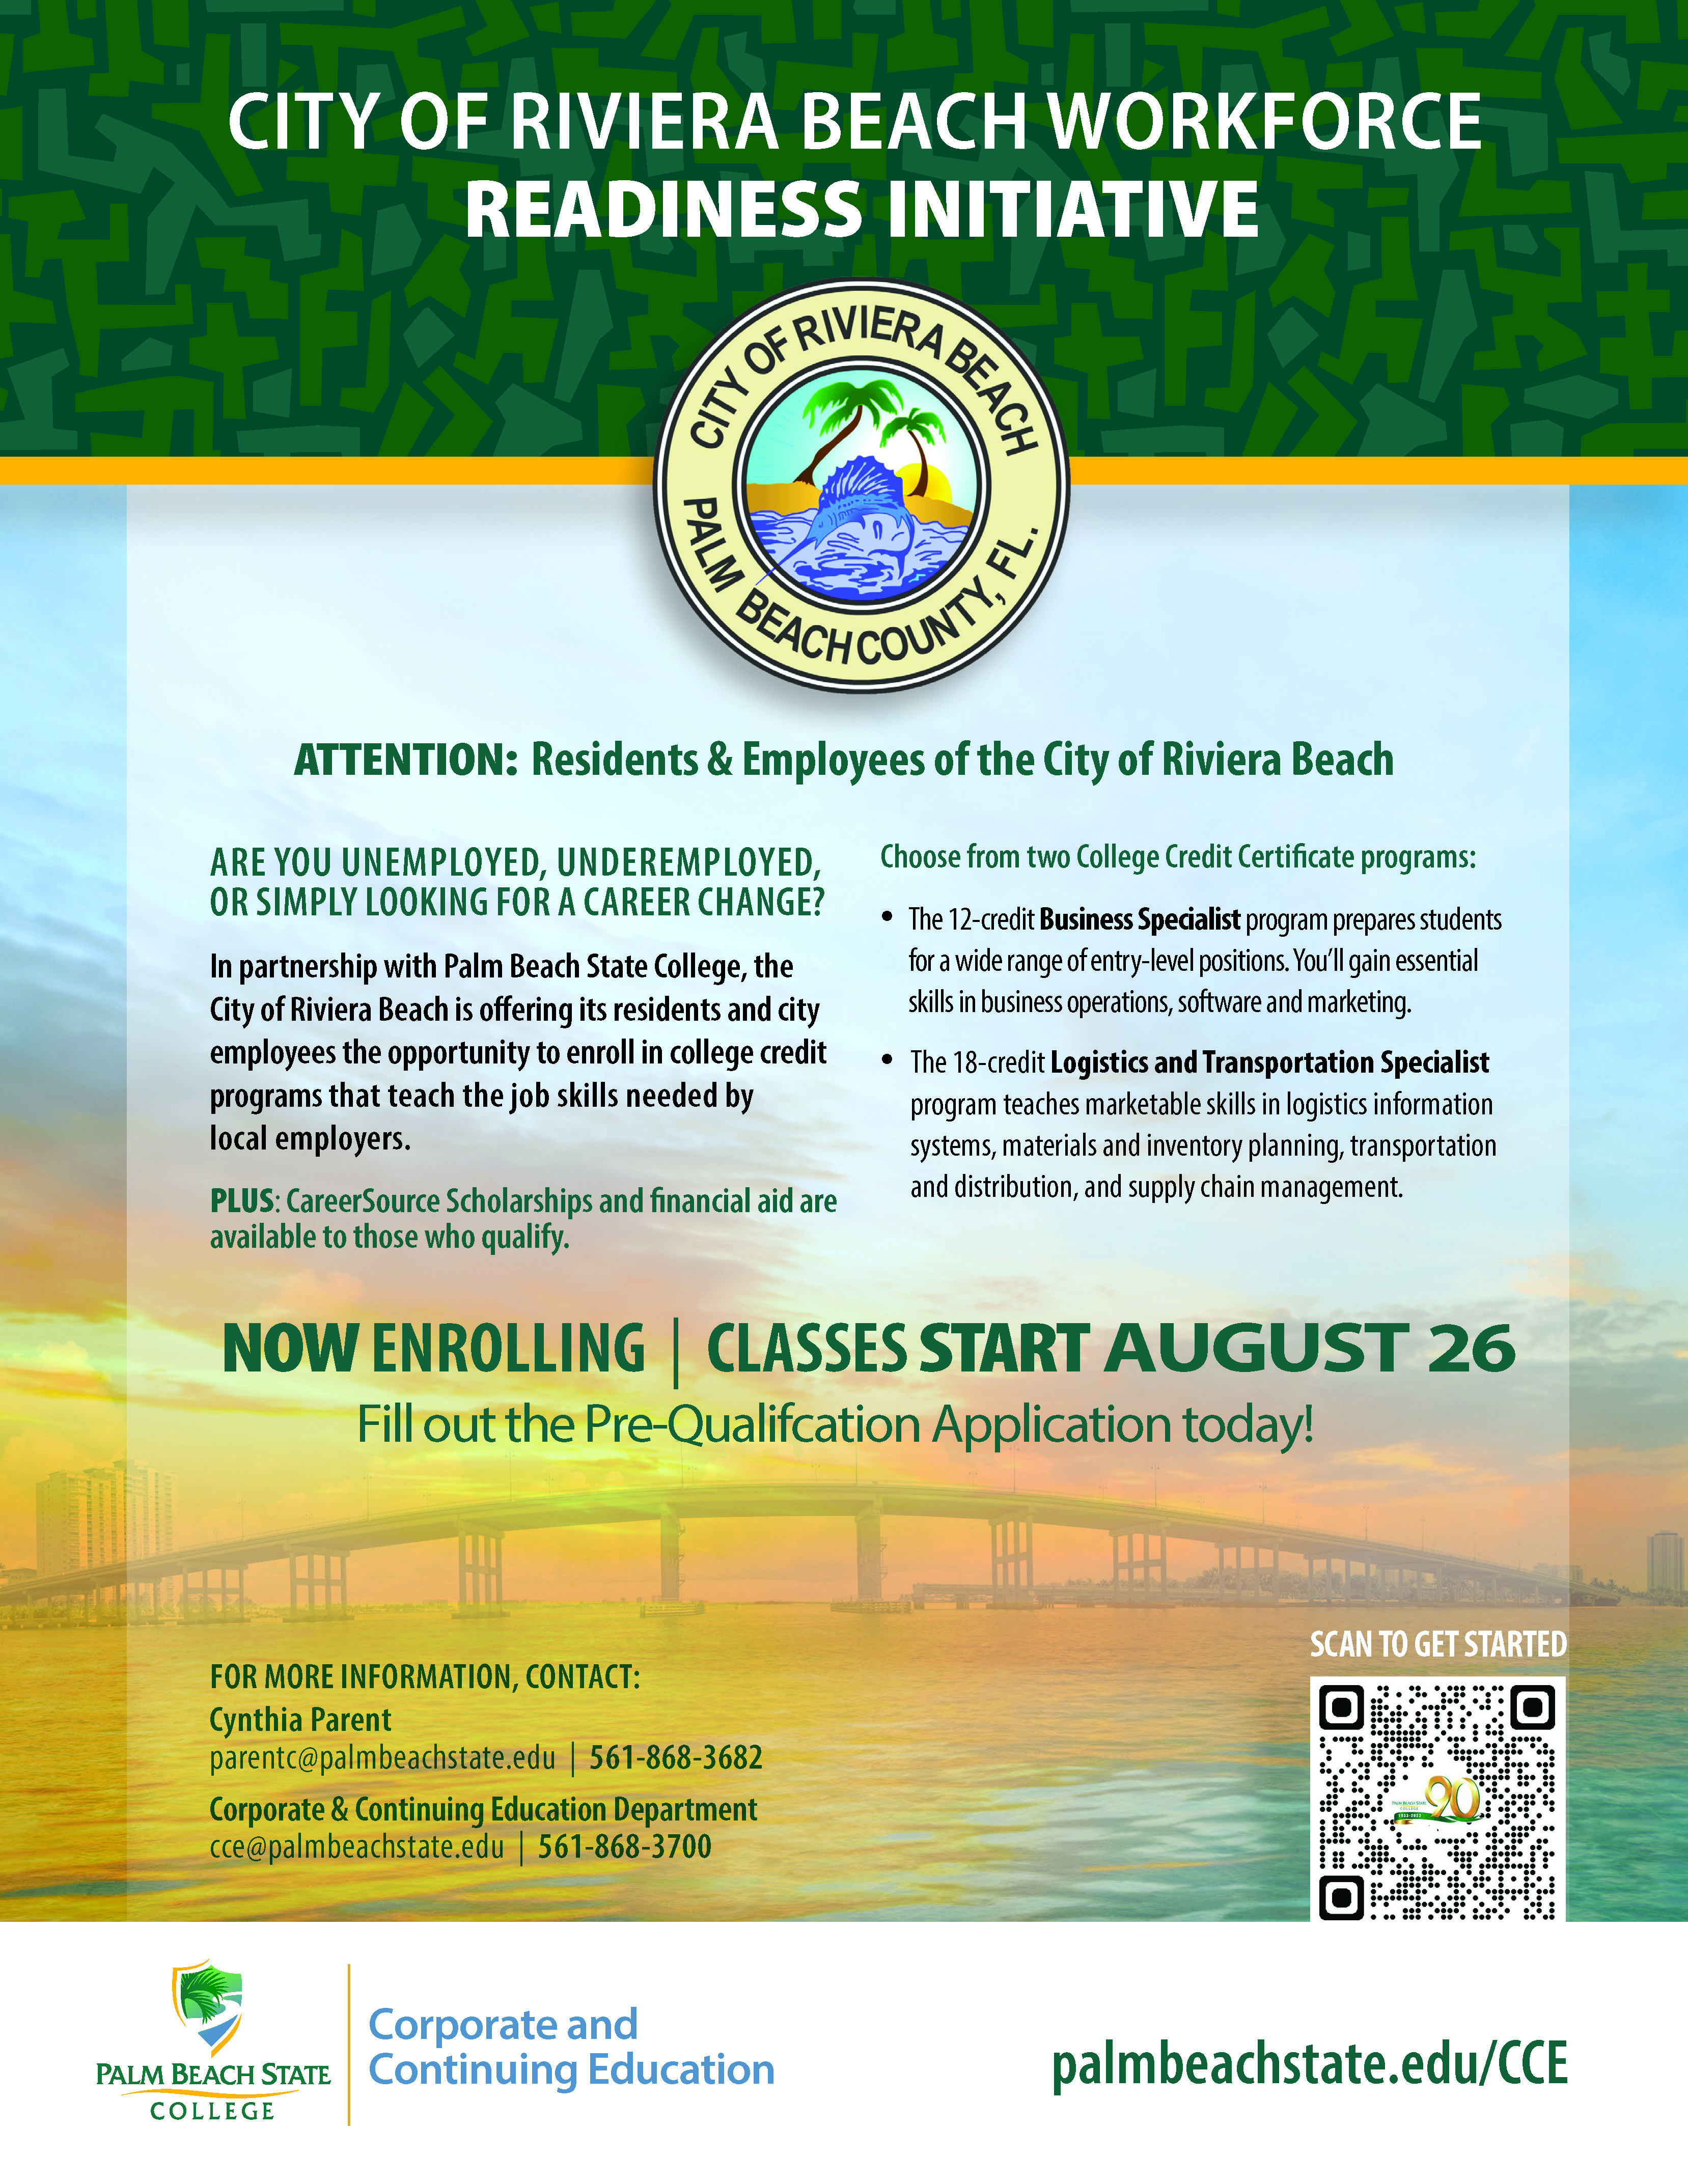 ARE YOU UNEMPLOYED, UNDEREMPLOYED, OR SIMPLY LOOKING FOR A CAREER CHANGE? In partnership with Palm Beach State College, the City of Riviera Beach is offering its residents and city employees the opportunity to enroll in college credit programs that teach the job skills needed by local employers. PLUS: CareerSource Scholarships and financial aid are available to those who qualify. Choose from two College Credit Certificate programs: • The 12-credit Business Specialist program prepares students for a wide range of entry-level positions. You’ll gain essential skills in business operations, software and marketing. • The 18-credit Logistics and Transportation Specialist program teaches marketable skills in logistics information systems, materials and inventory planning, transportation and distribution, and supply chain management. CITY OF RIVIERA BEACH WORKFORCE READINESS INITIATIVE NOW ENROLLING | CLASSES START AUGUST 26 Fill out the Pre-Qualifcation Application today! SCAN TO GET STARTED palmbeachstate.edu/CCE